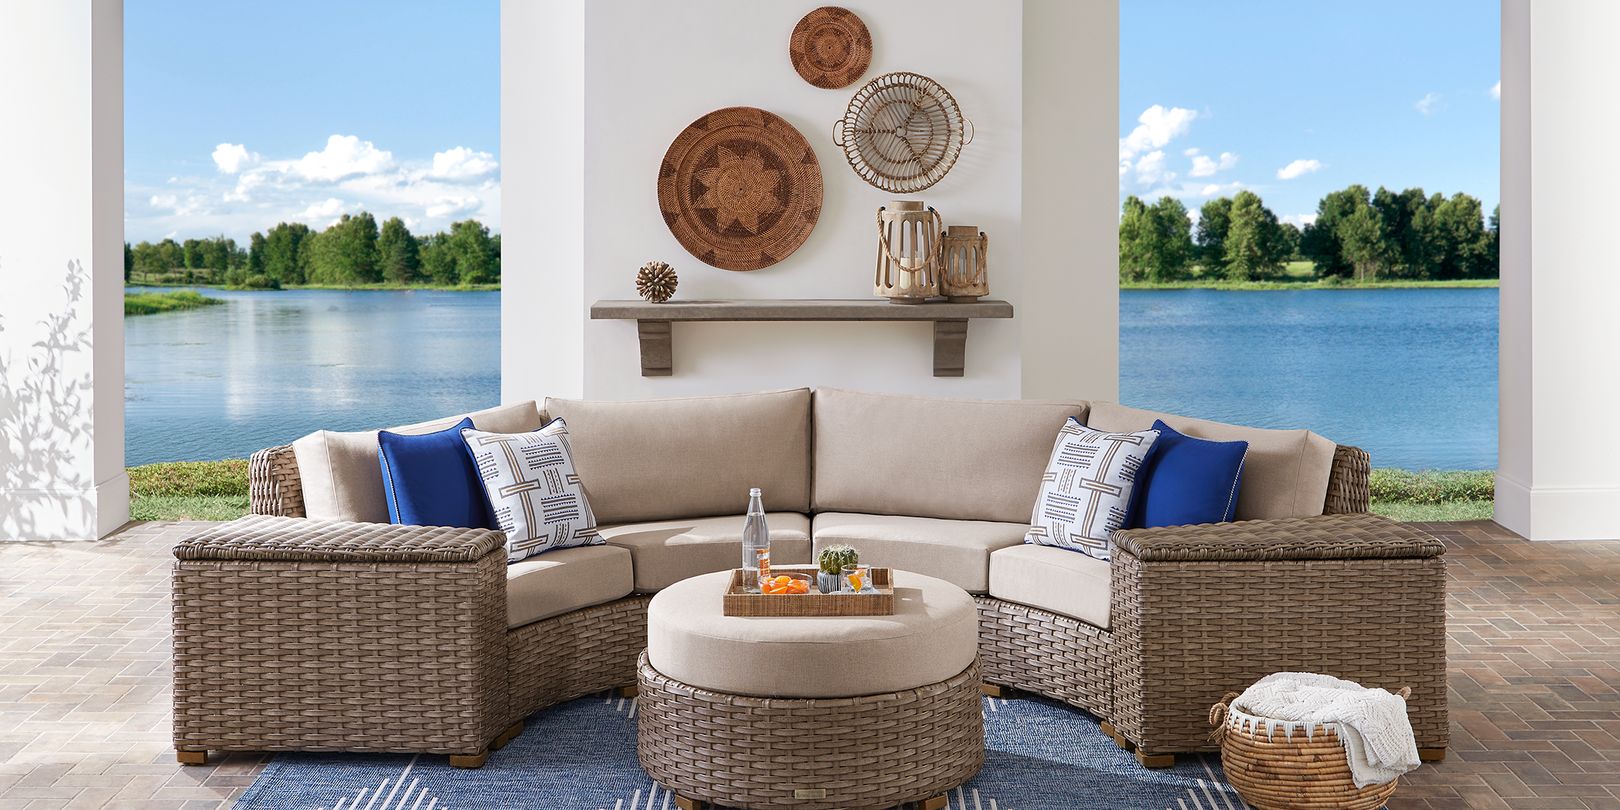 Photo of curved wicker outdoor sectional on a patio with wall hangings behind it